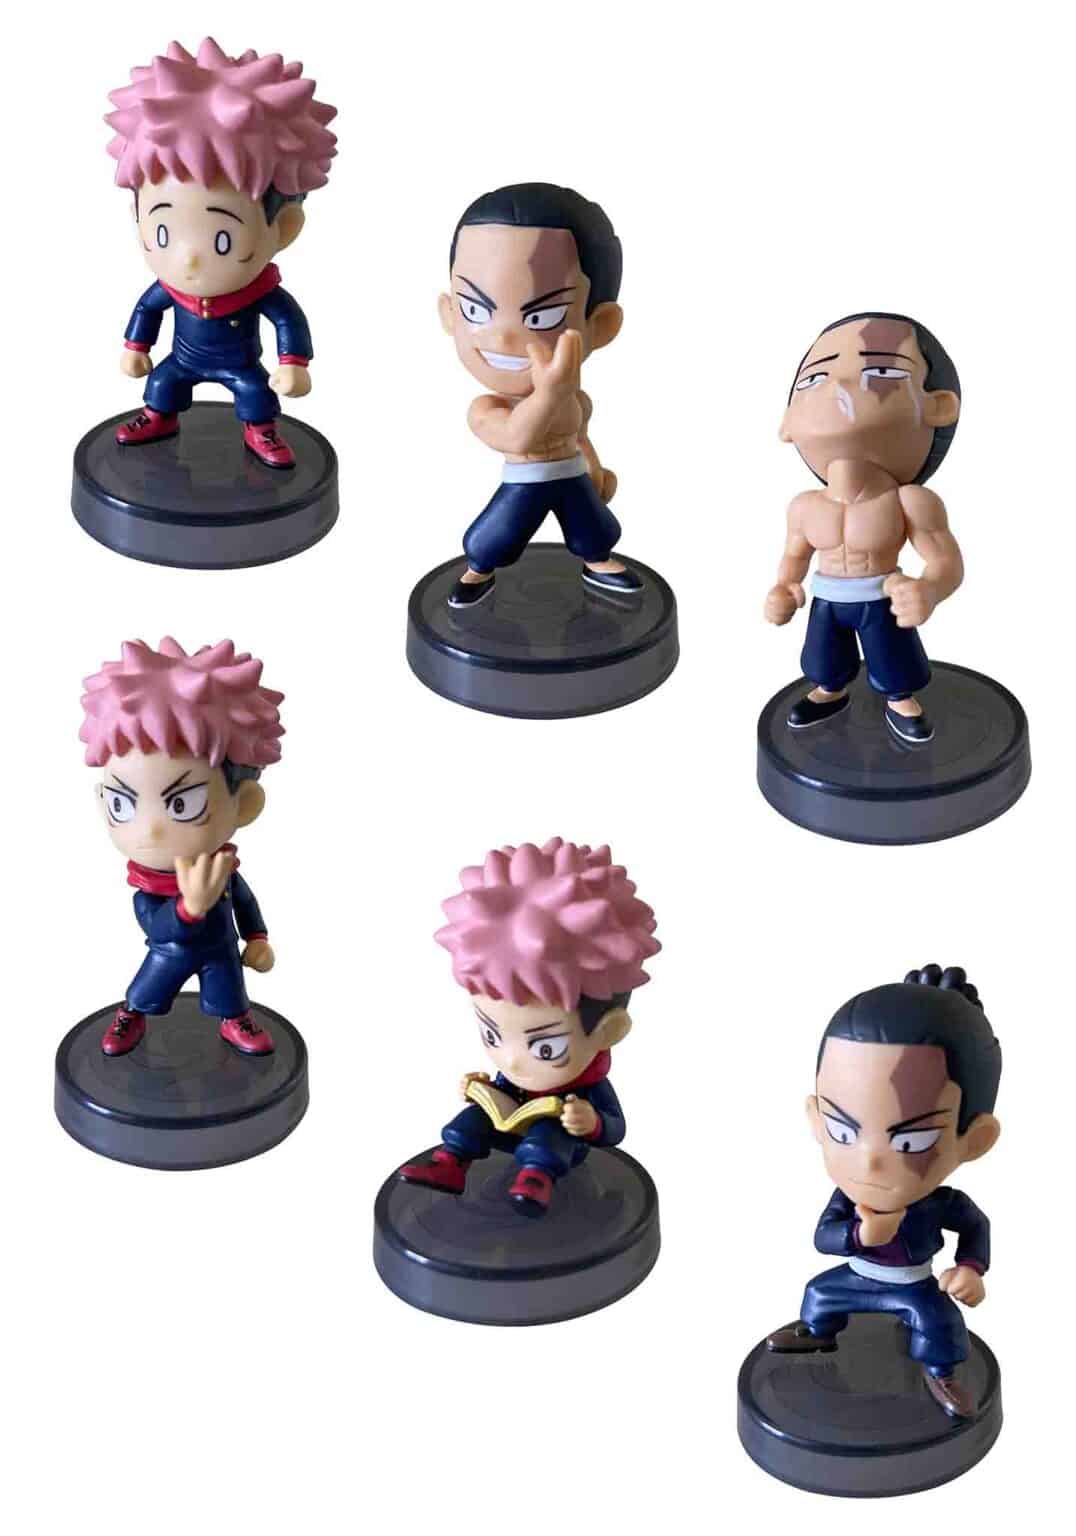 Clever Idiots Jujutsu Kaisen My Best Friends Collection Surprise Box Kawaii Gifts 4580045305828